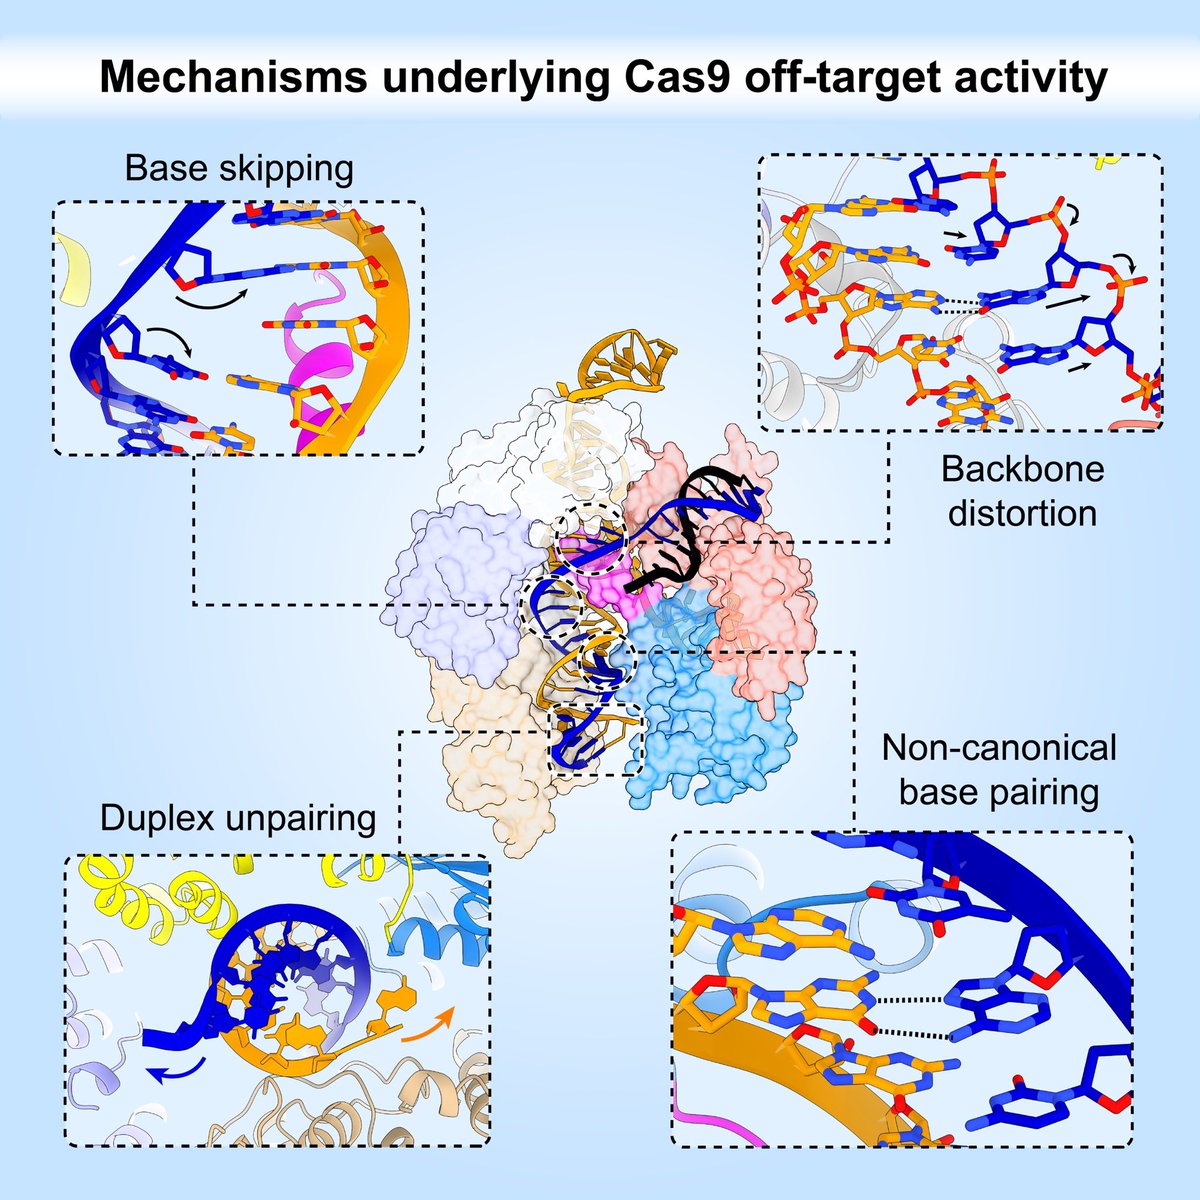 I’m so happy to announce that the results of our study on the mechanistic basis of Cas9 off-target activity have been published in Cell! cell.com/cell/fulltext/…